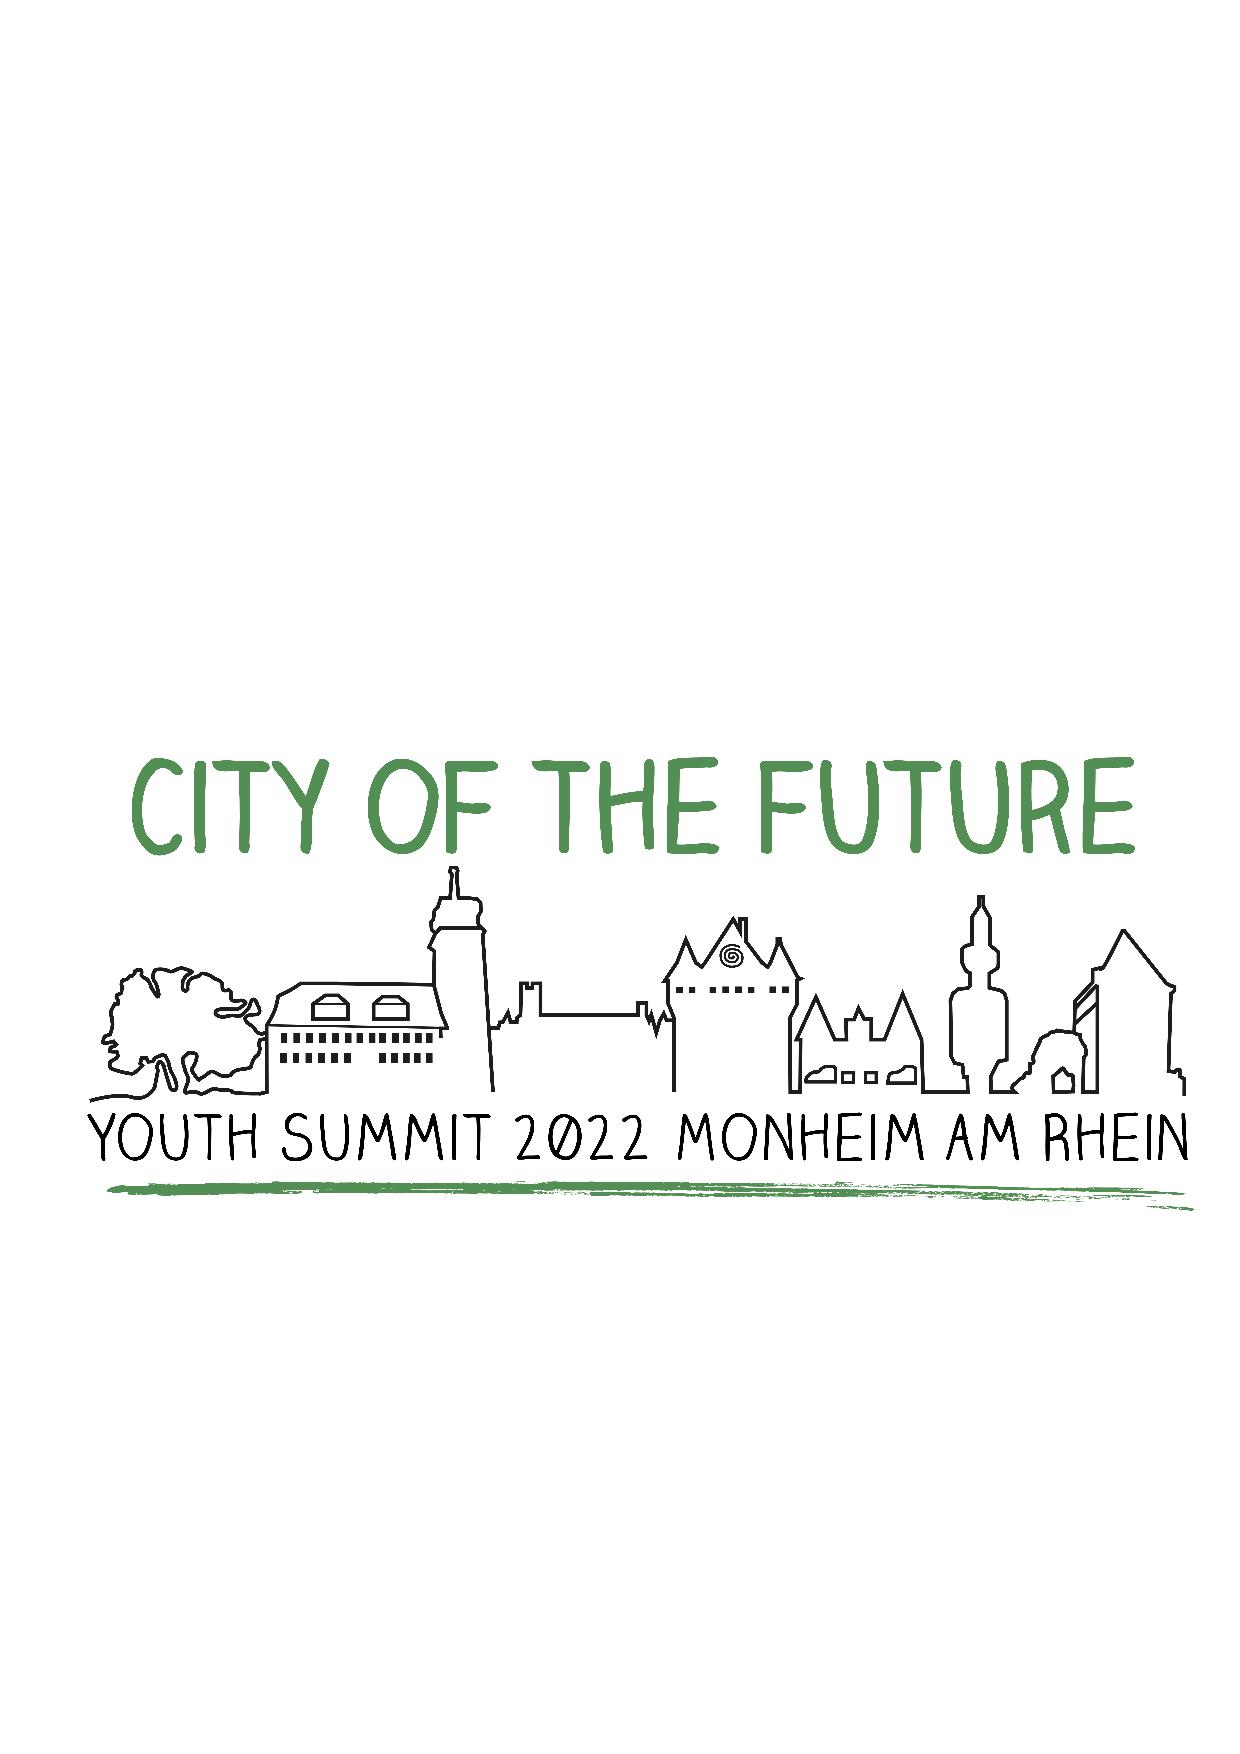 Youth Summit "City of the Future" 2022